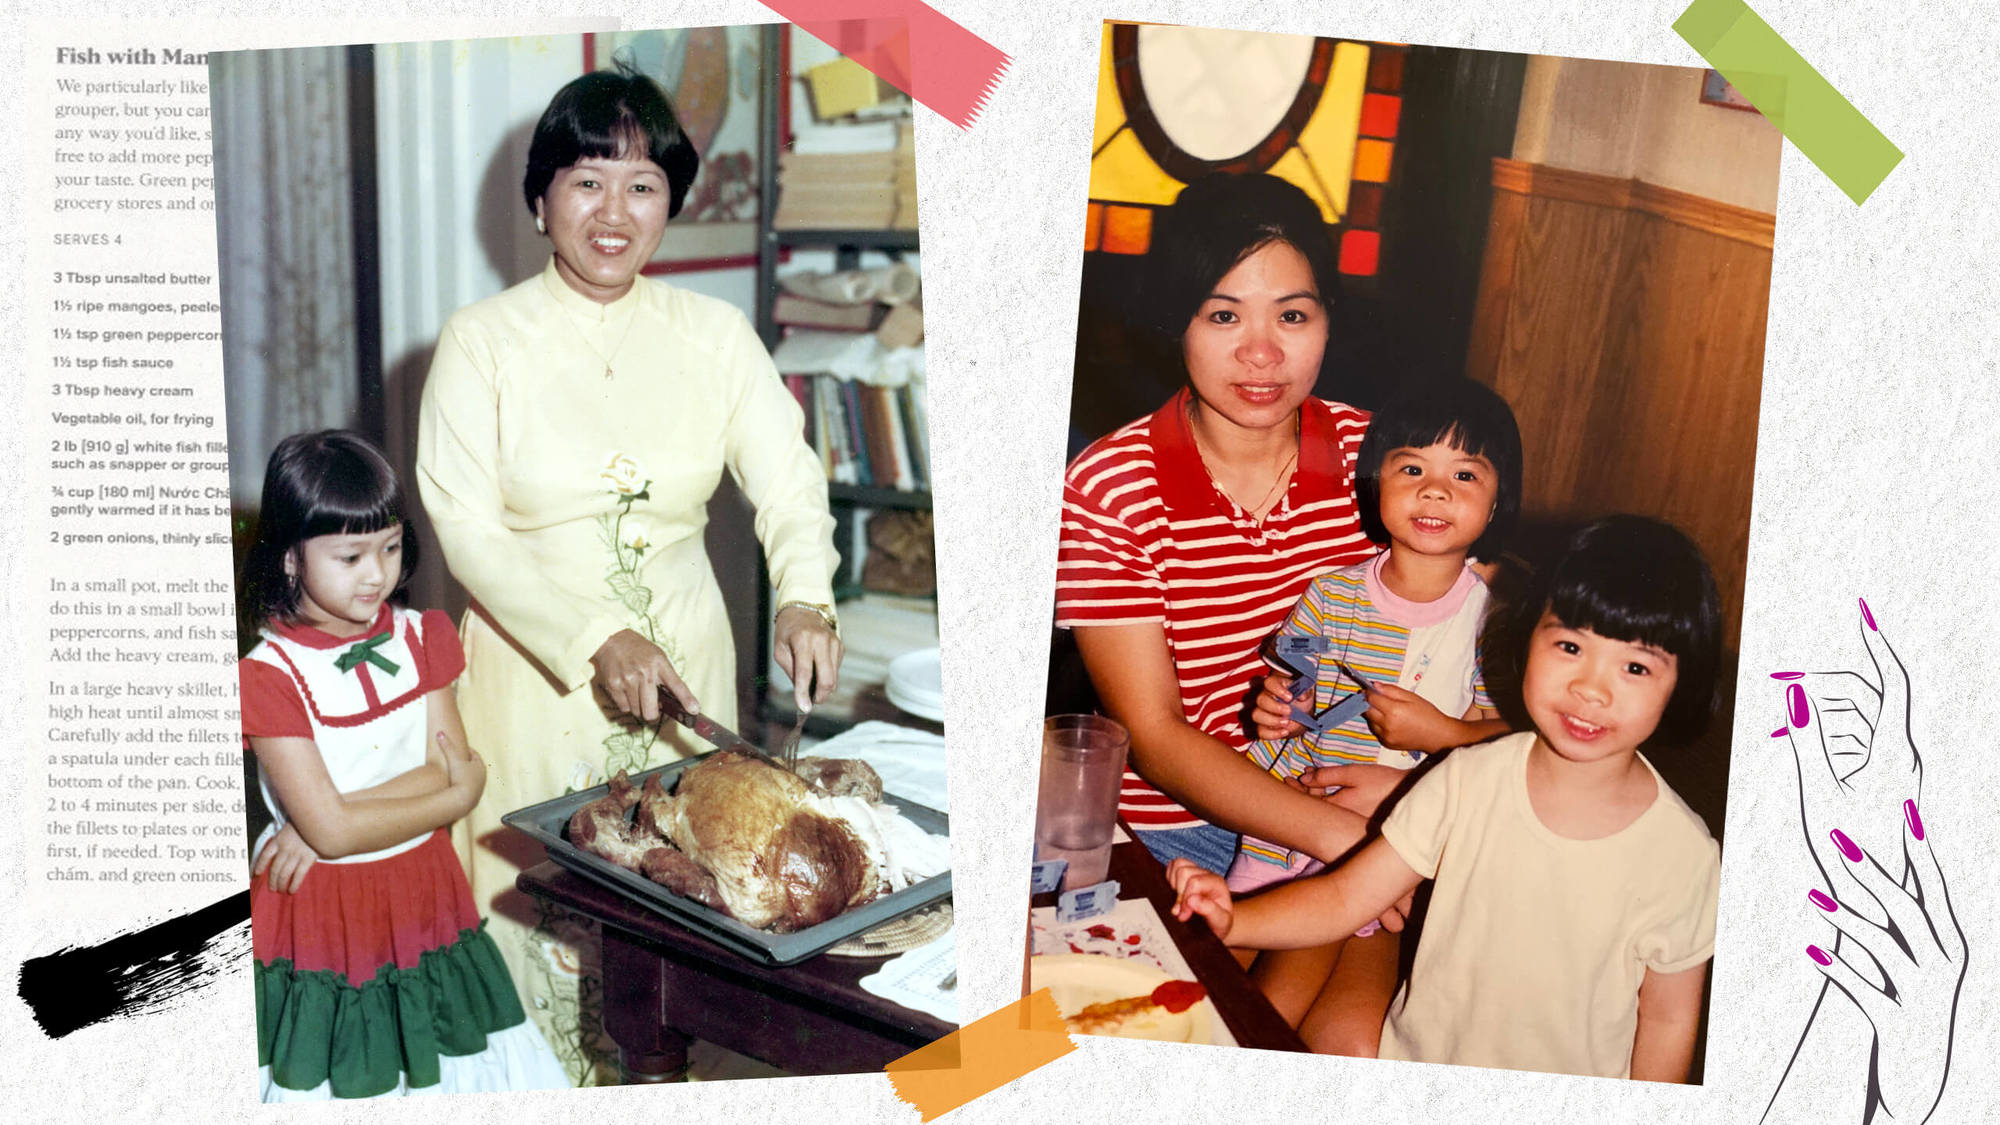 Lyn Nguyen with her mom Tung on Christmas, 1982 (left). Counter staffer Tricia Vuong (in pink) with her mom and sister, 2000 (right). June 2021